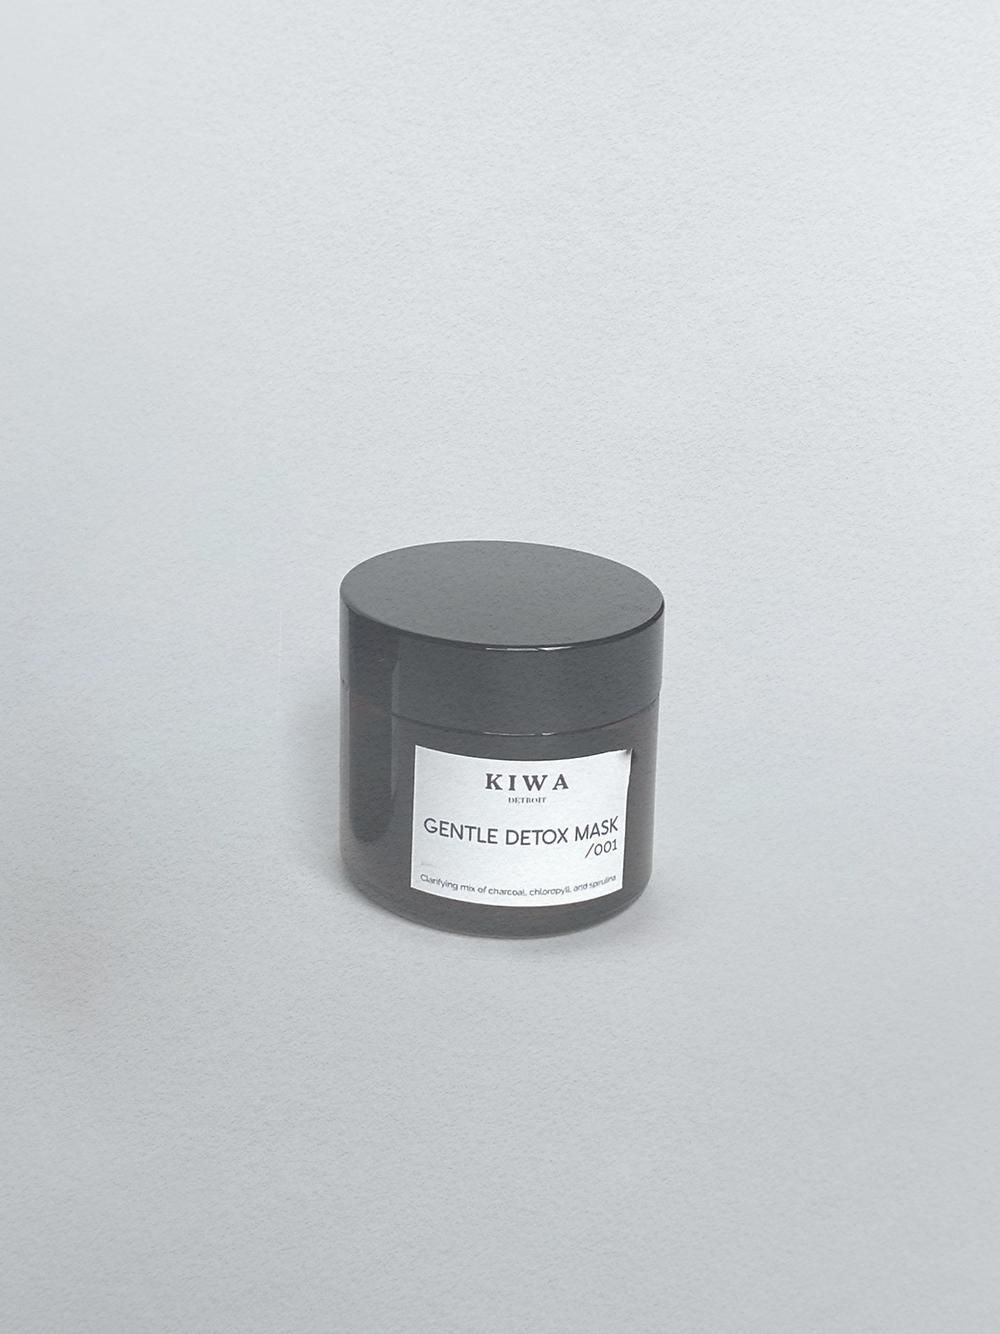 Product Image for Gentle Detox Mask